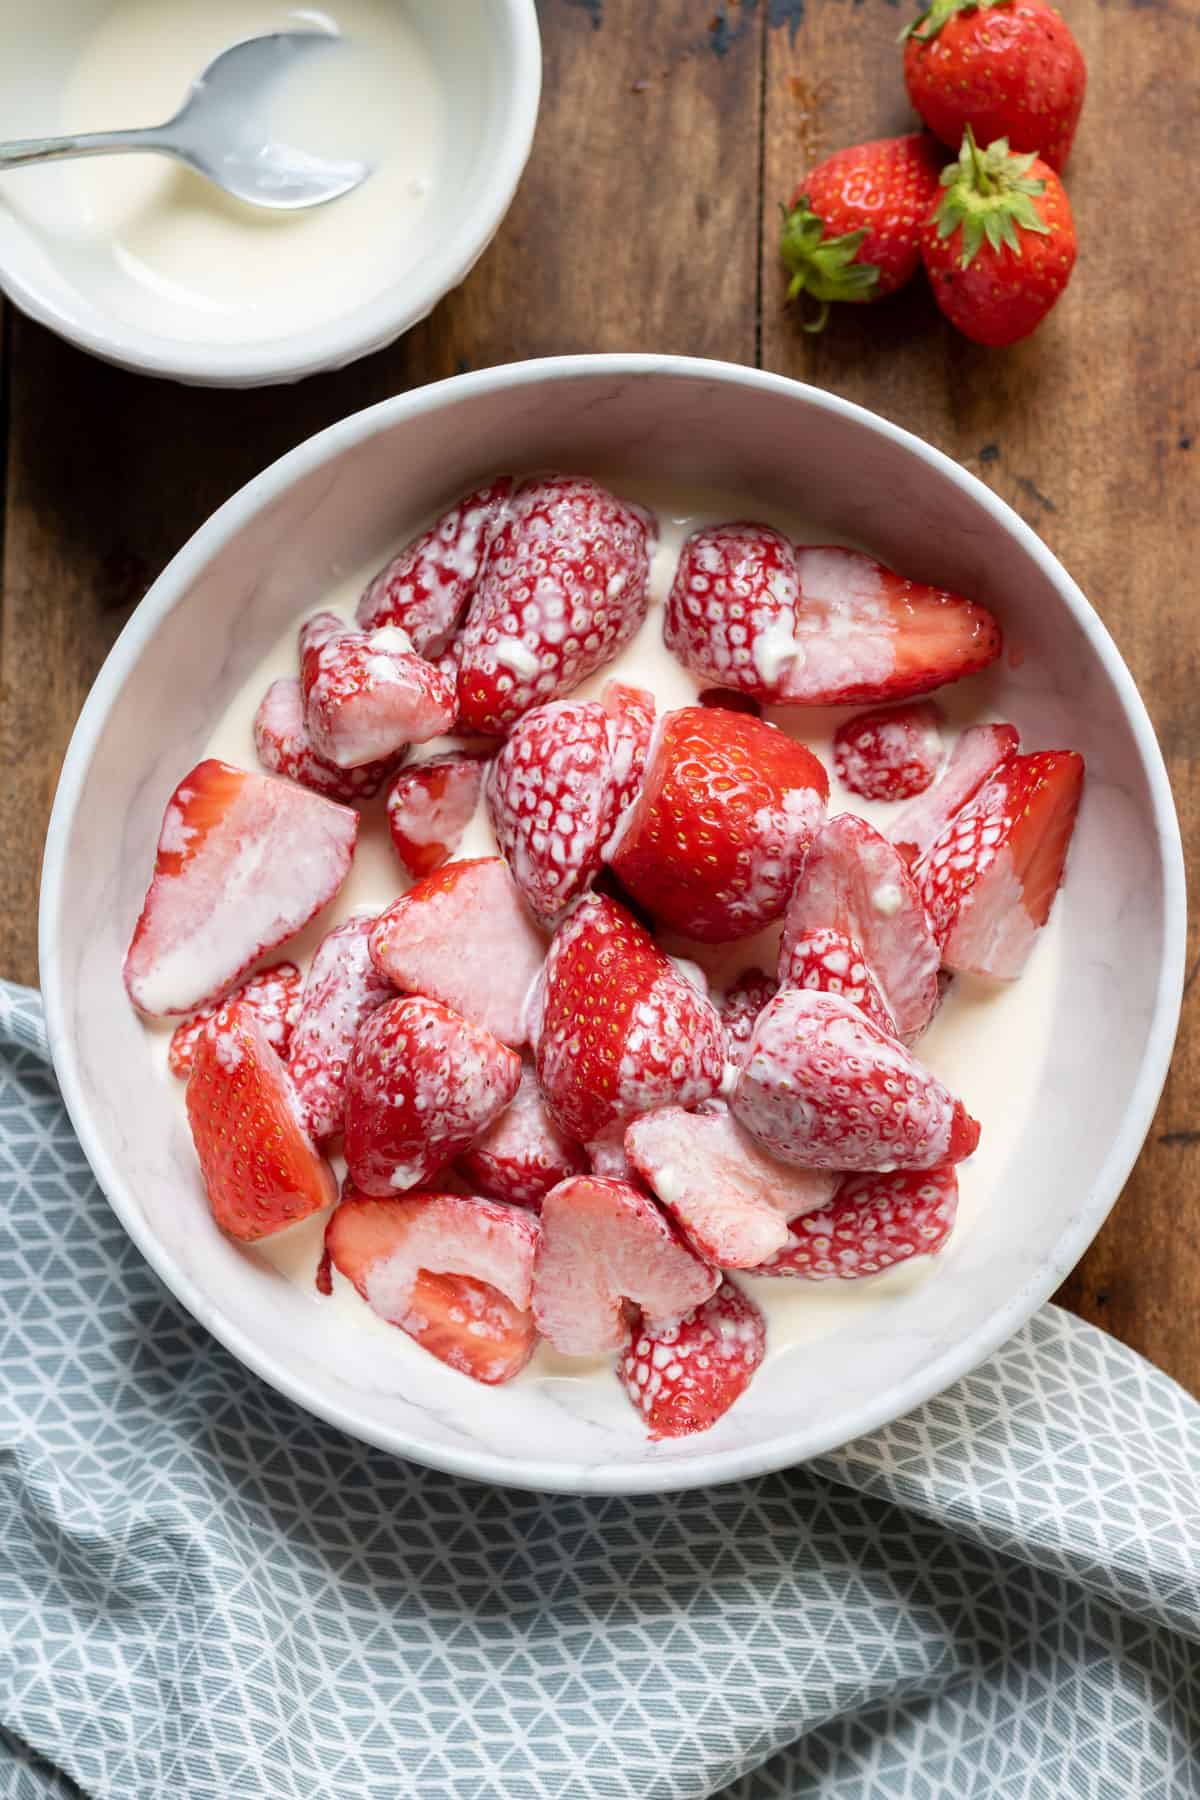 Bowl of cream and strawberries.